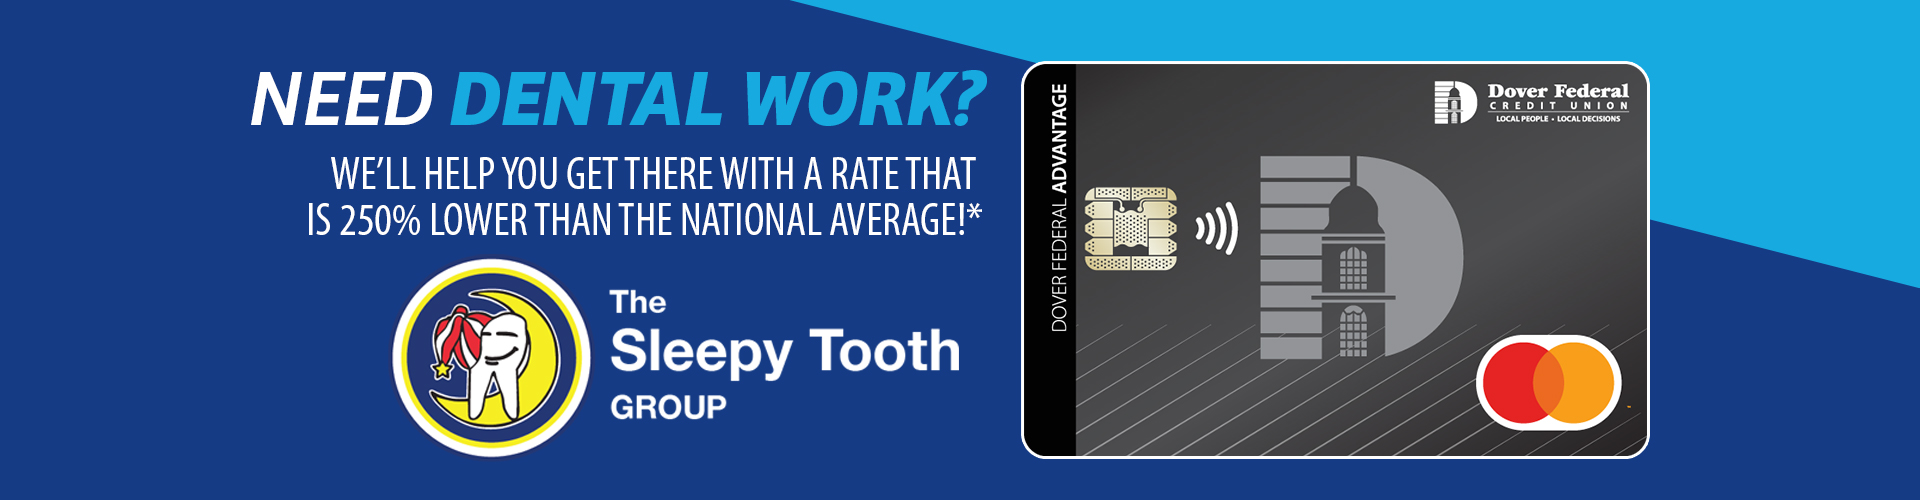 Need dental work? We’ll help you get there with a rate that is 250% lower than the national average.